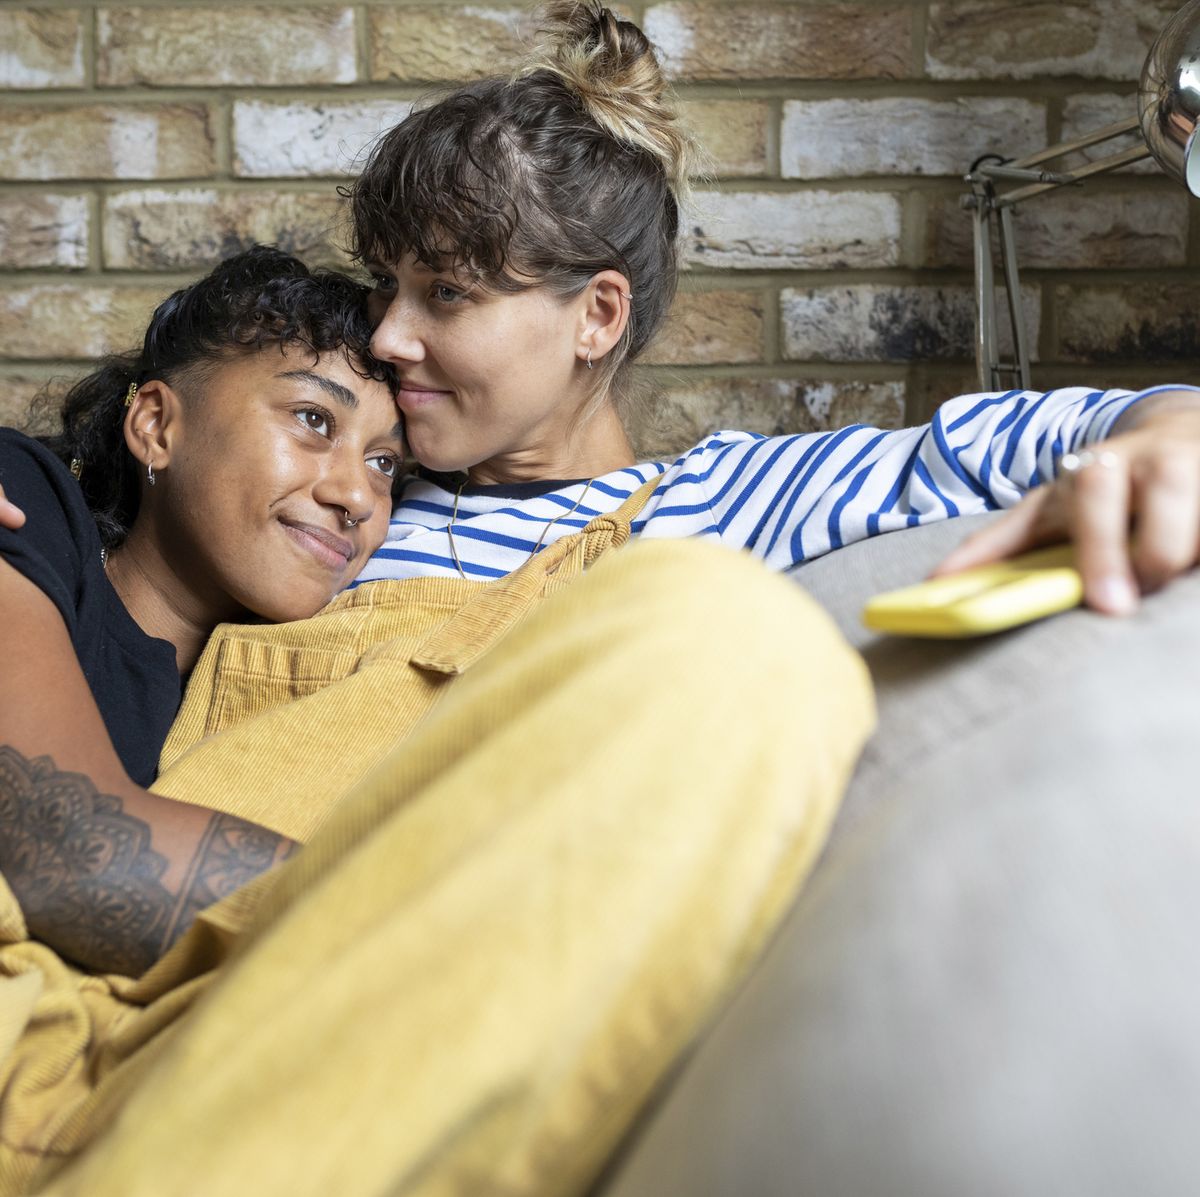 Turn Into A Lesbian - Am I a lesbian? How to know if you're a lesbian